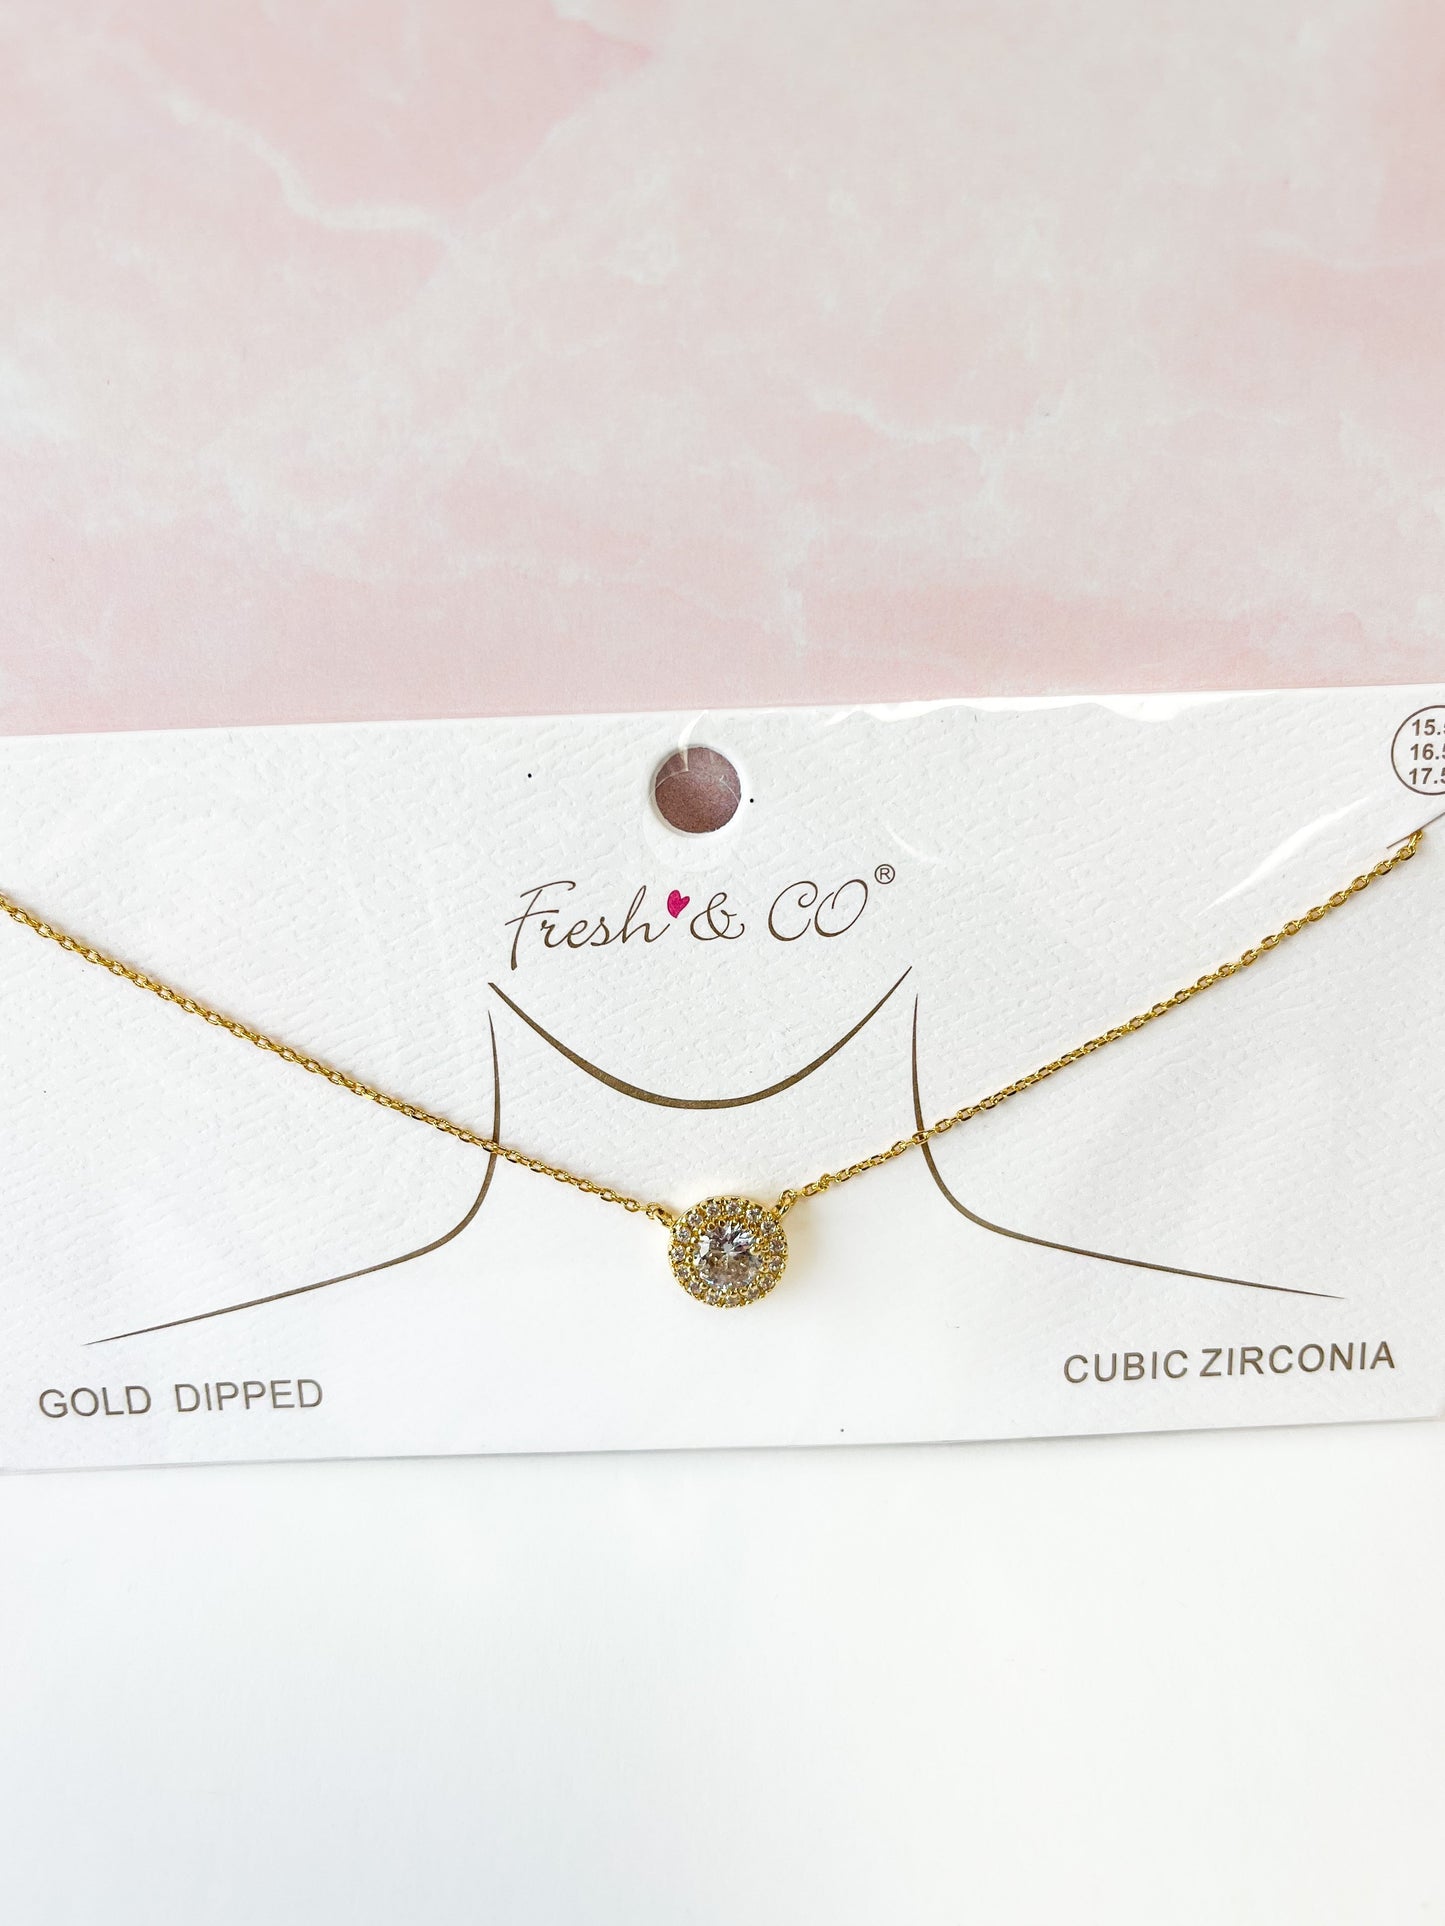 Gold Dipped Cubic Zirconia Big Stone Pendant Necklace